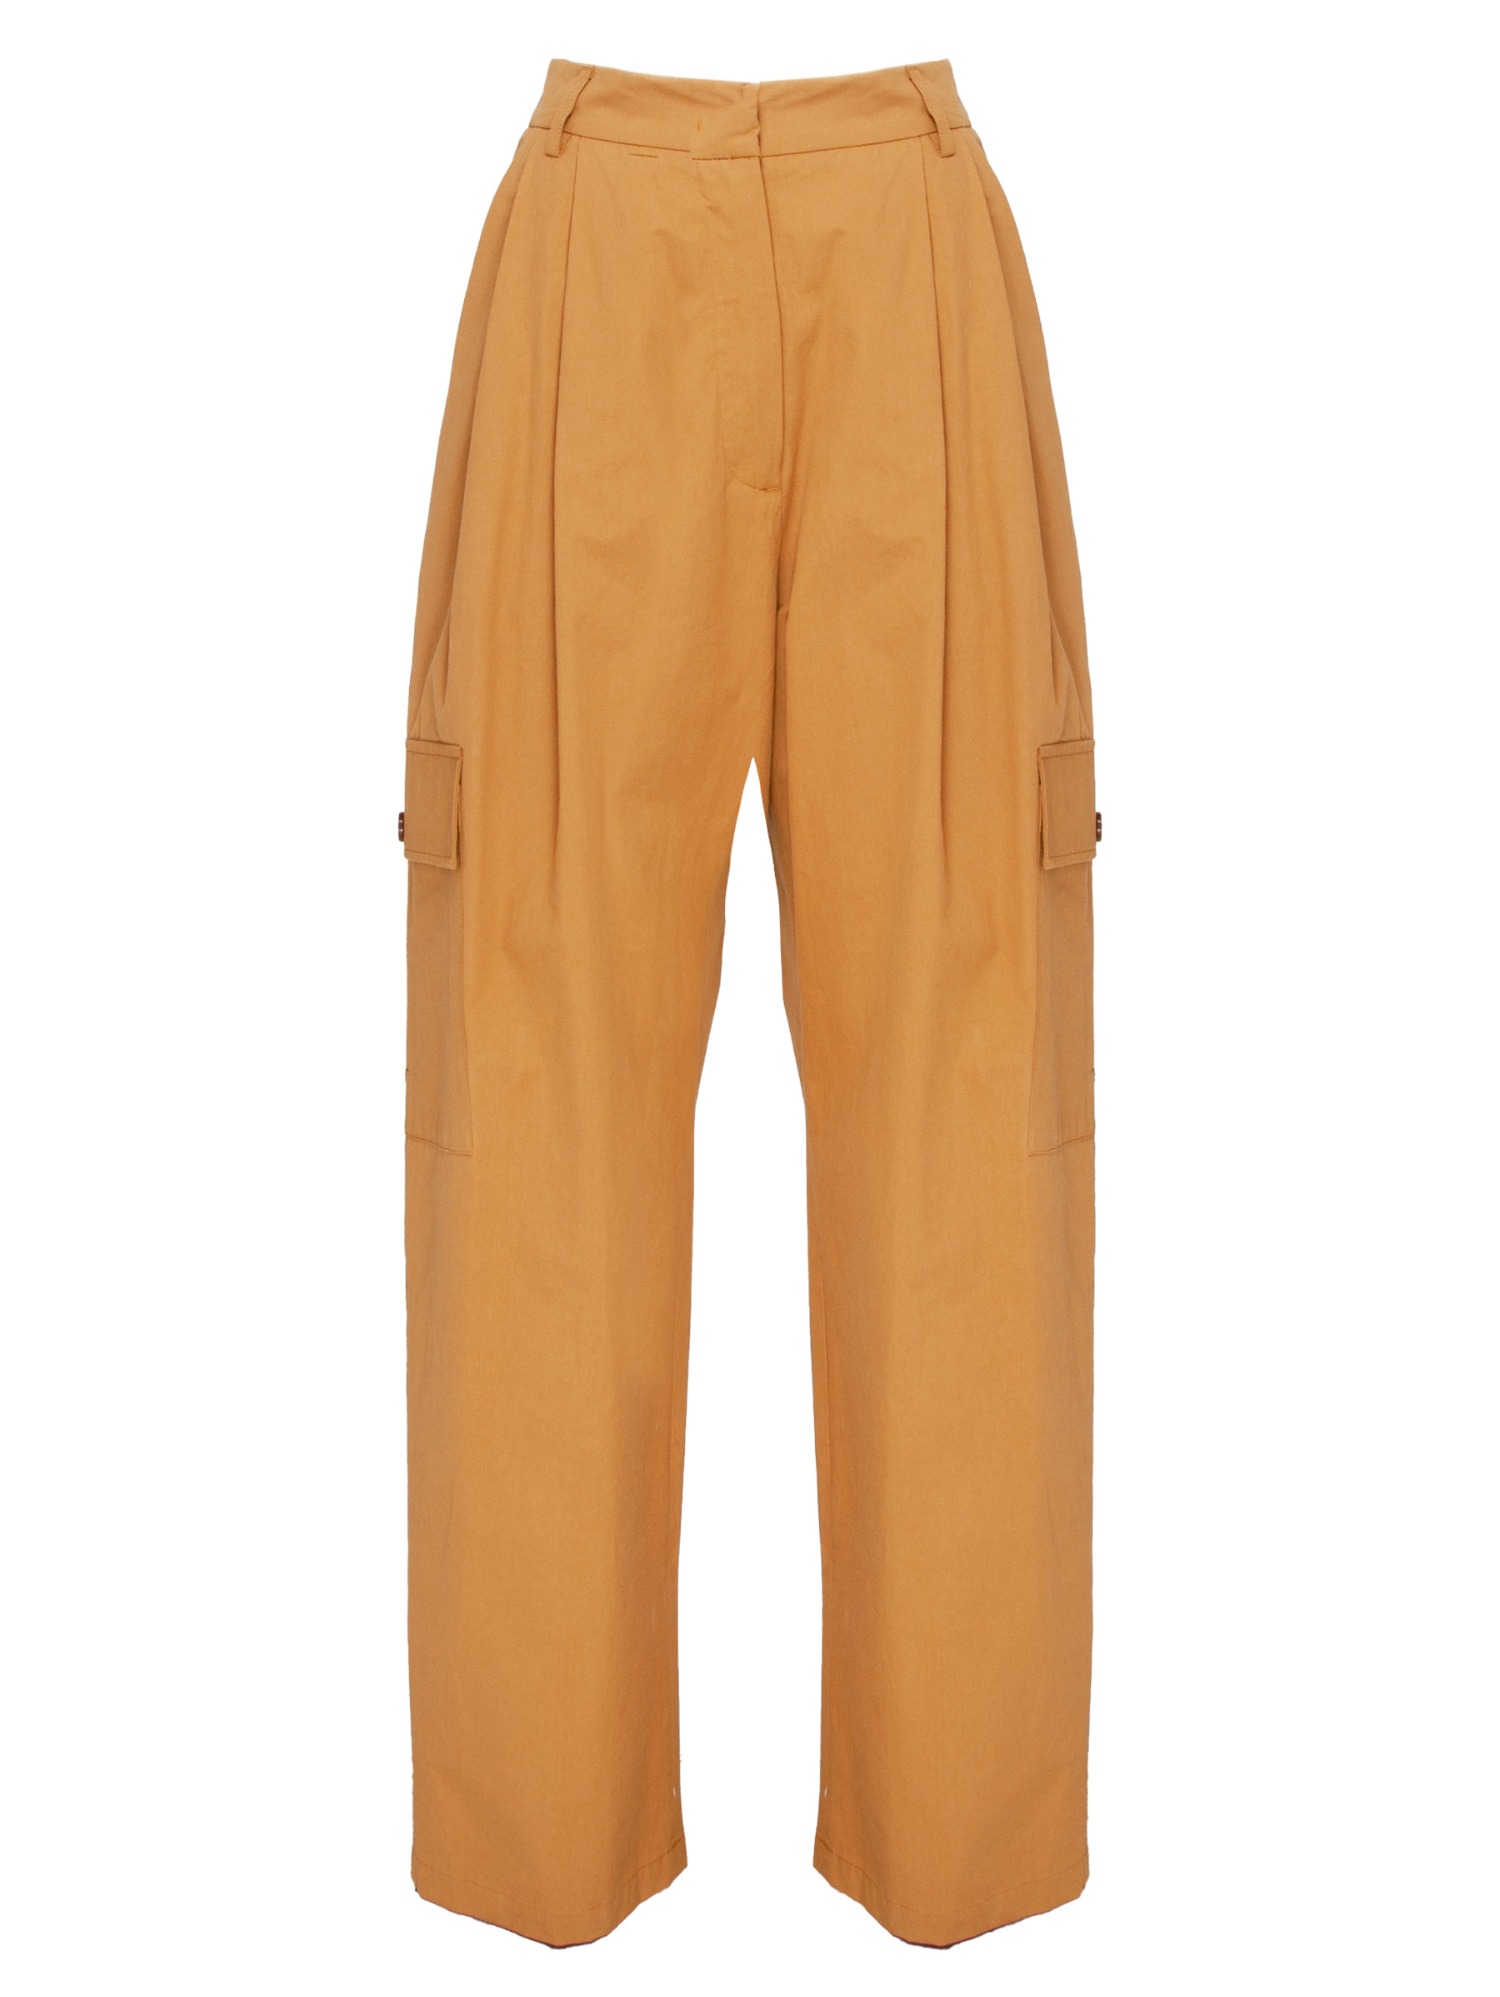 ATTIC AND BARN FAYETTE PANT